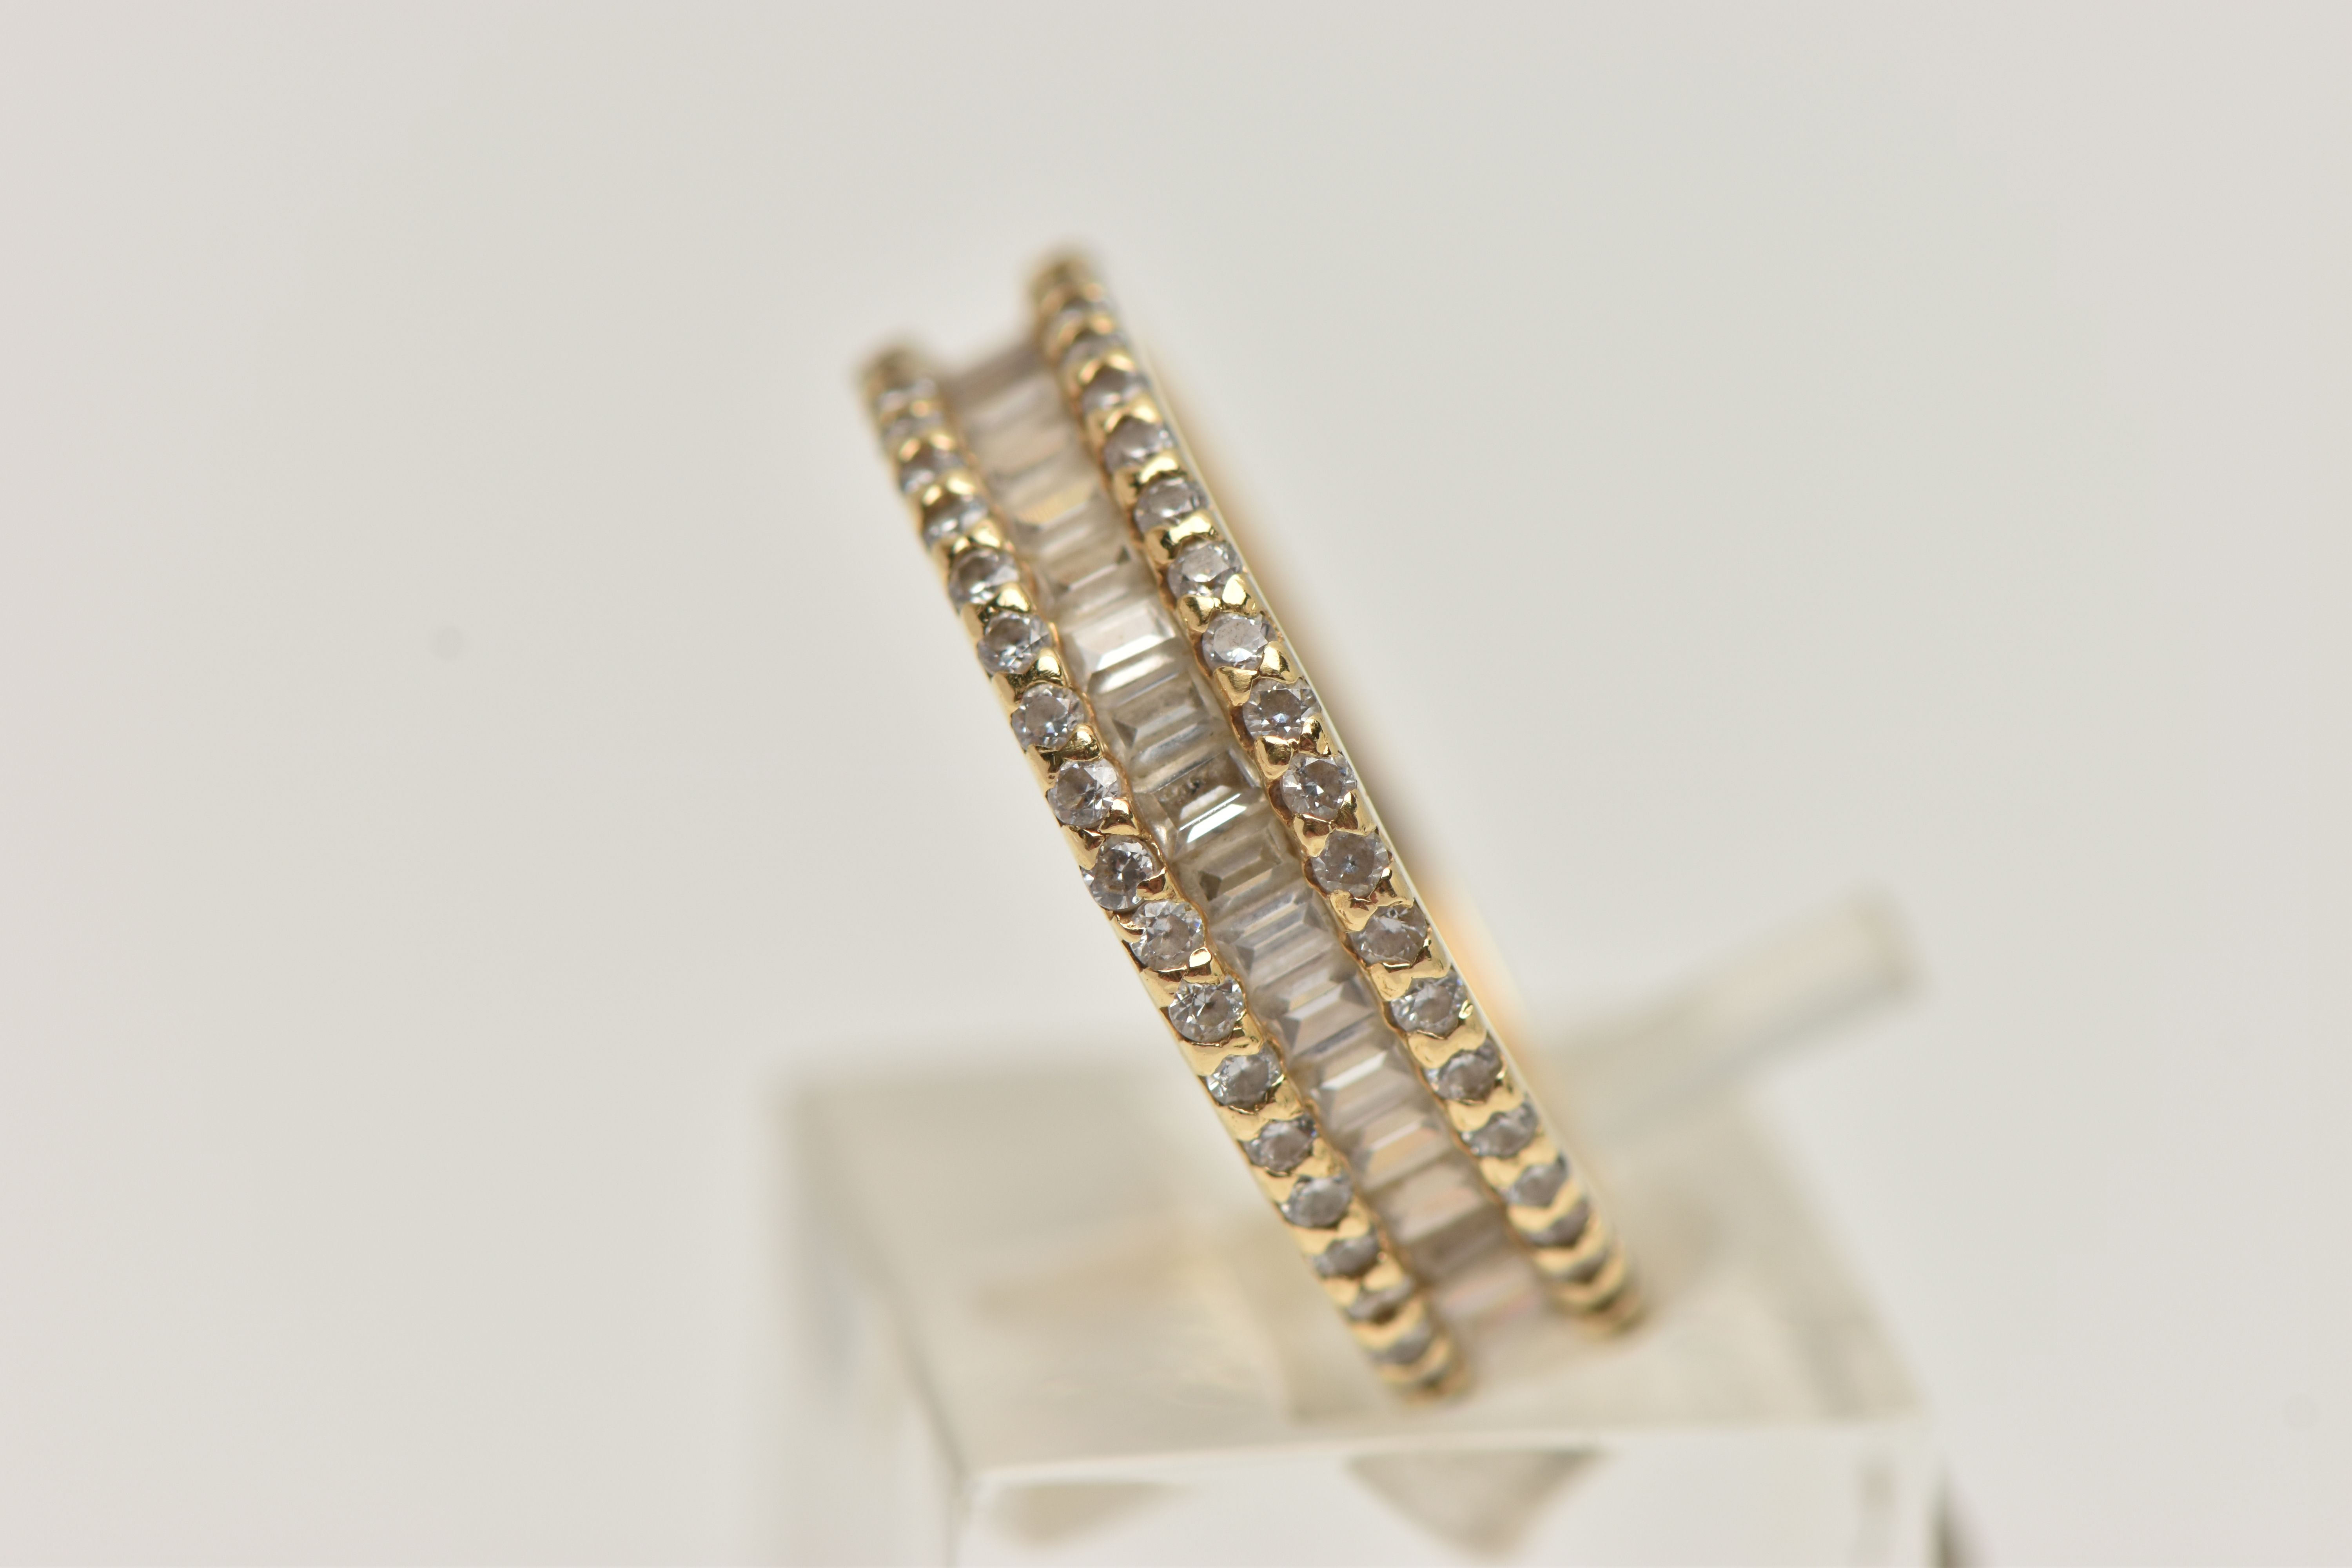 A YELLOW METAL DIAMOND BAND RING, set with a central row of baguette cut diamonds, between two - Image 2 of 4